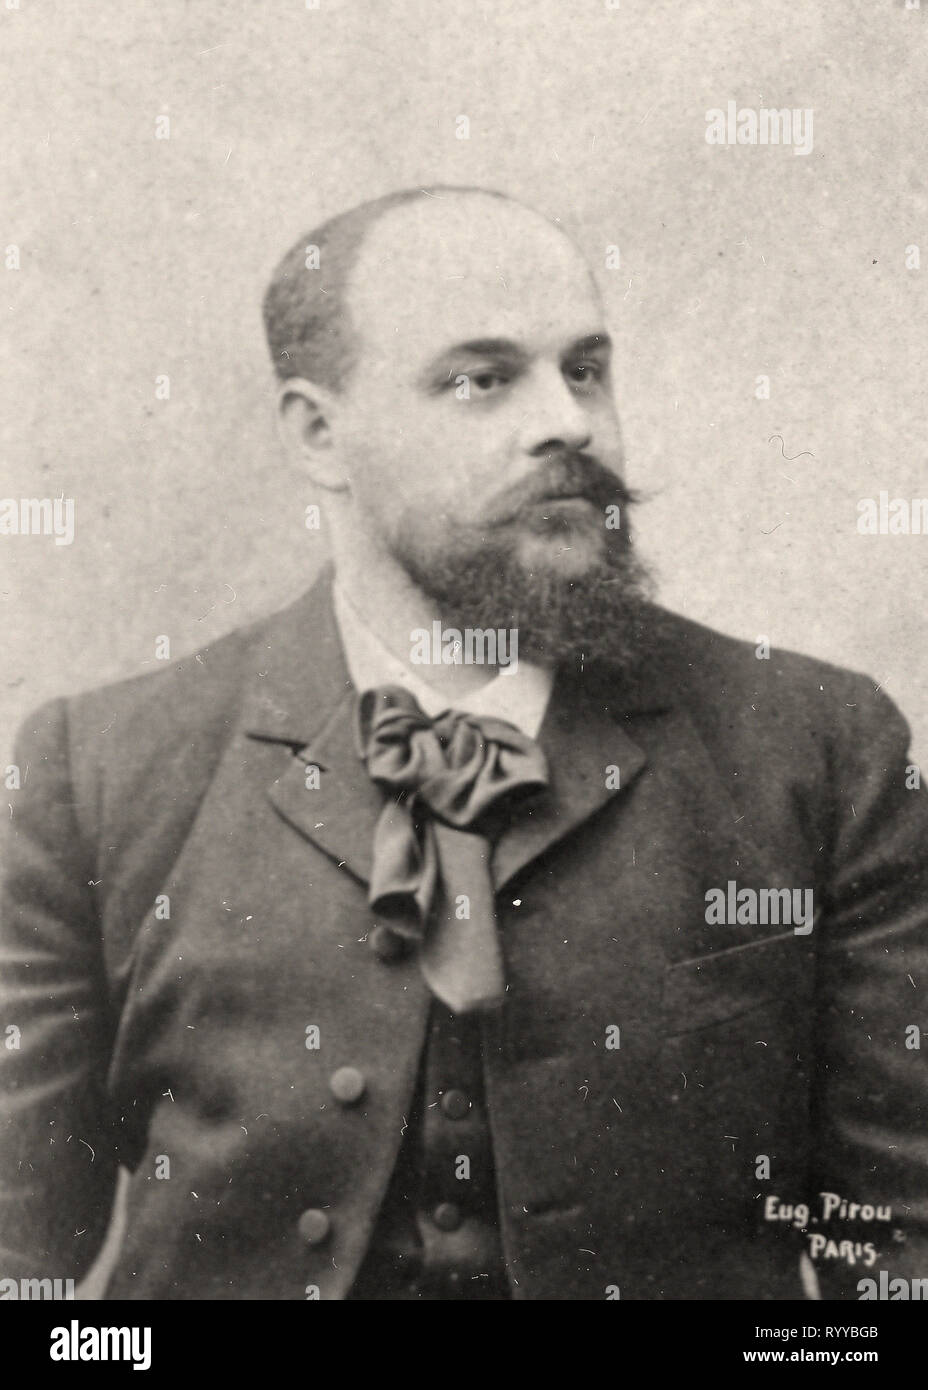 Photographic Portrait Of Mal   From Collection Félix Potin, Early 20th Century Stock Photo